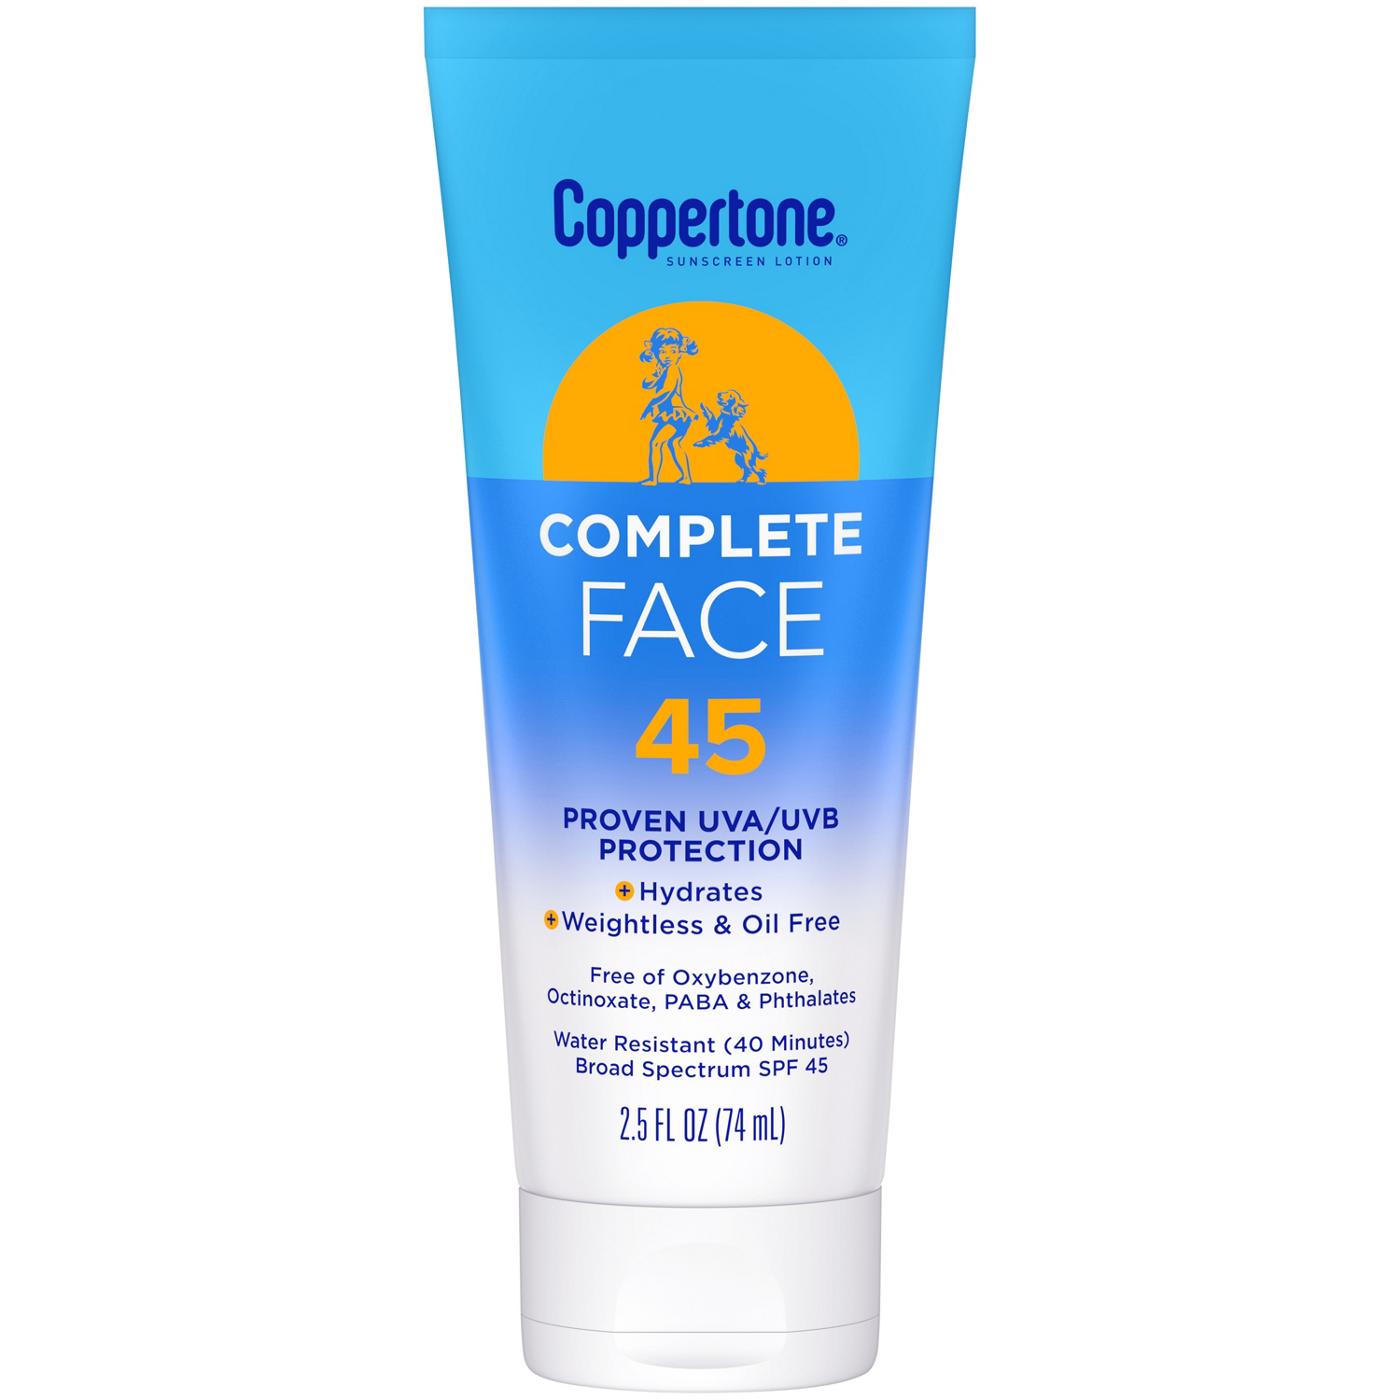 Coppertone Complete Face Sunscreen SPF 45; image 1 of 3